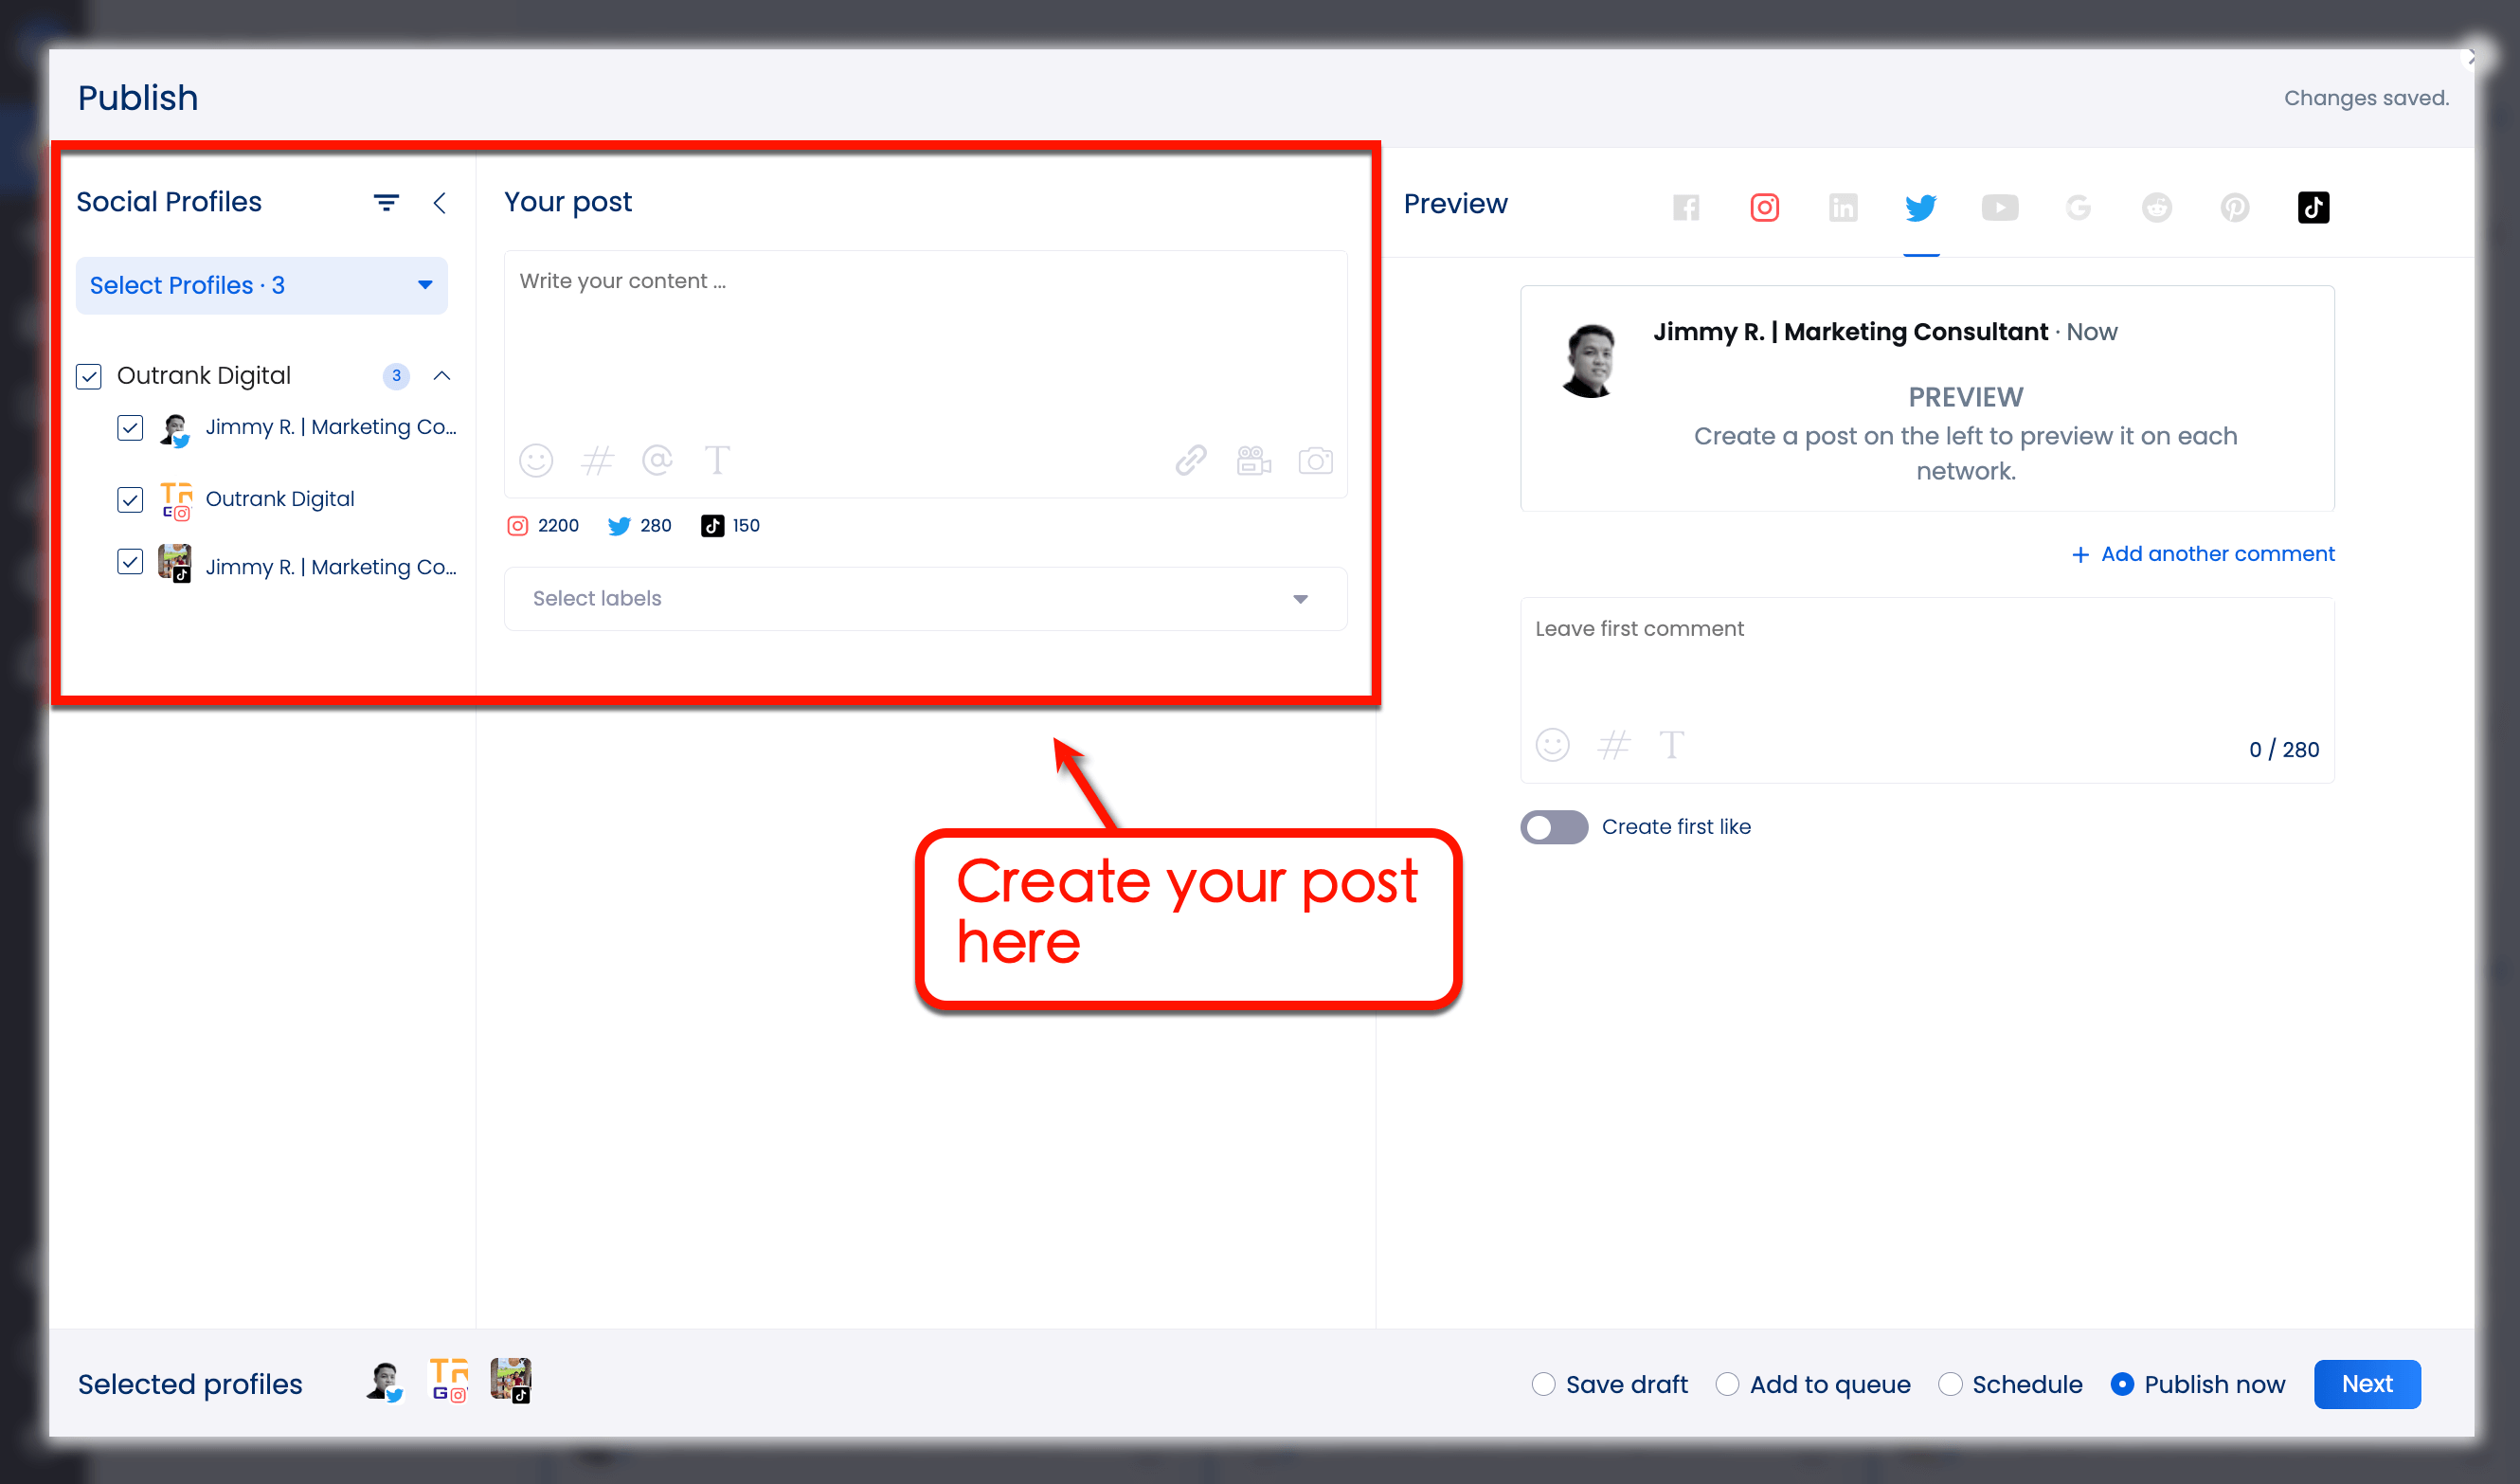 How to schedule a post on Vista Social